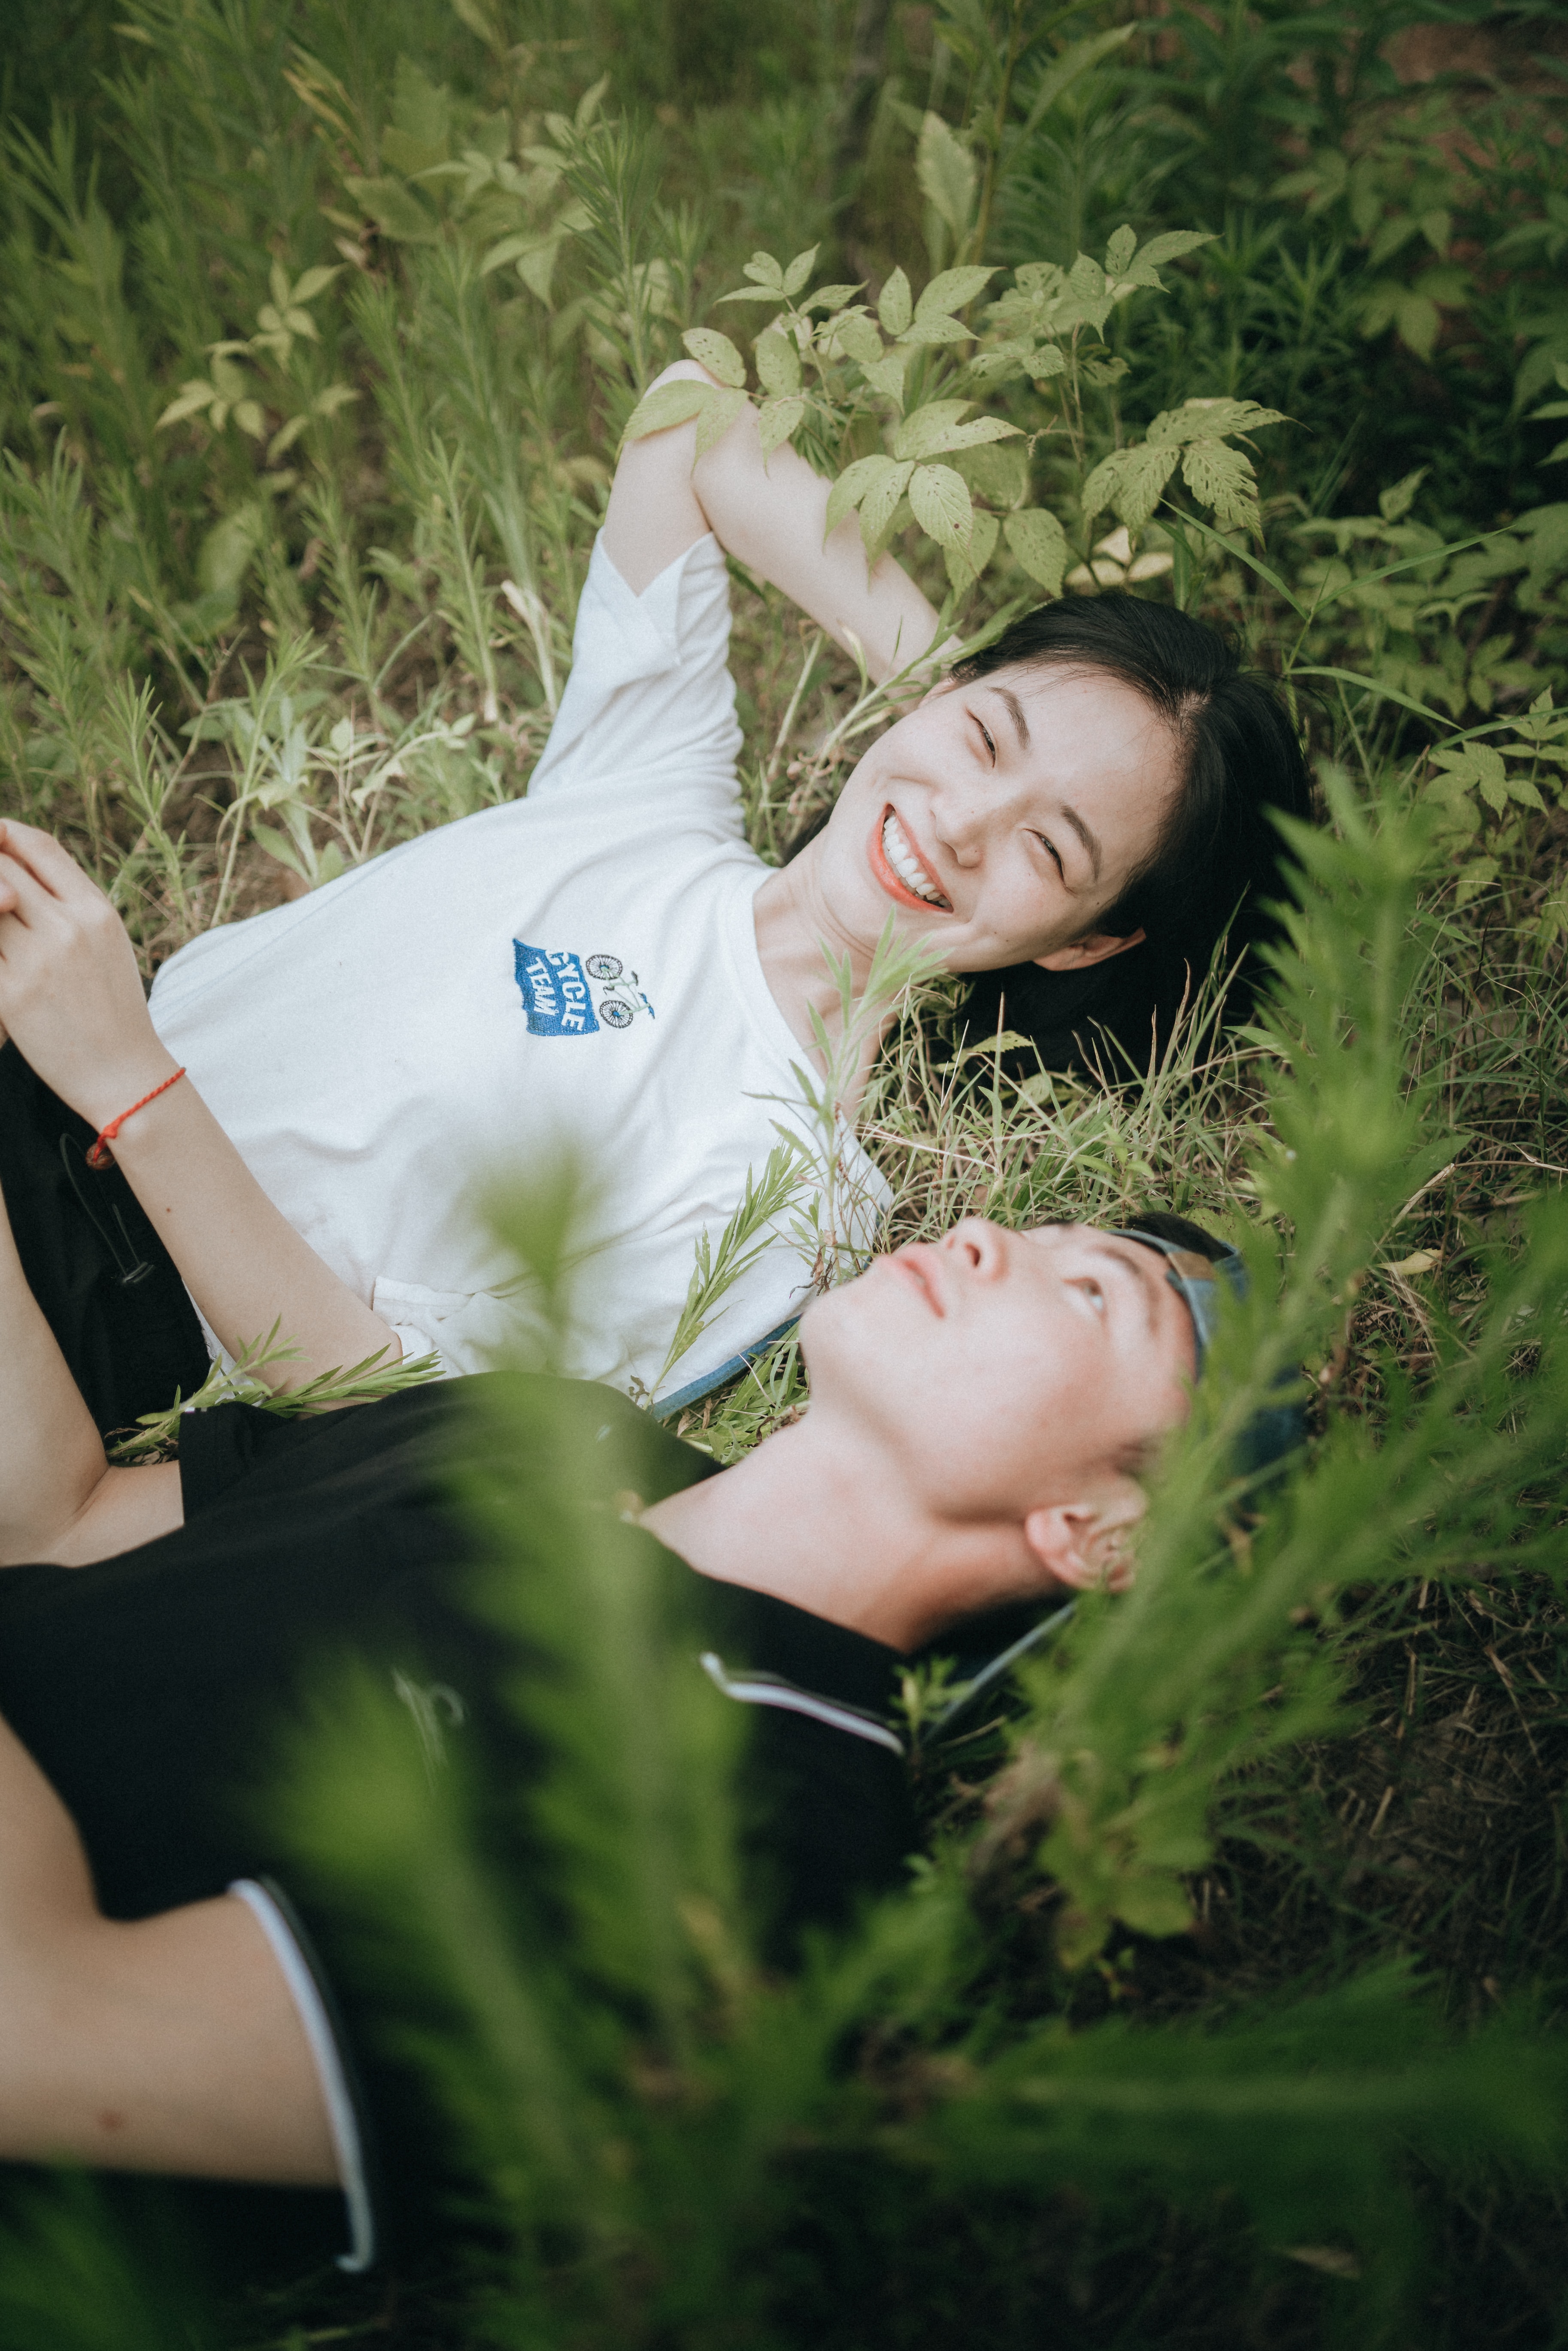 A photo of a man and woman laying on grass | Source: Unsplash